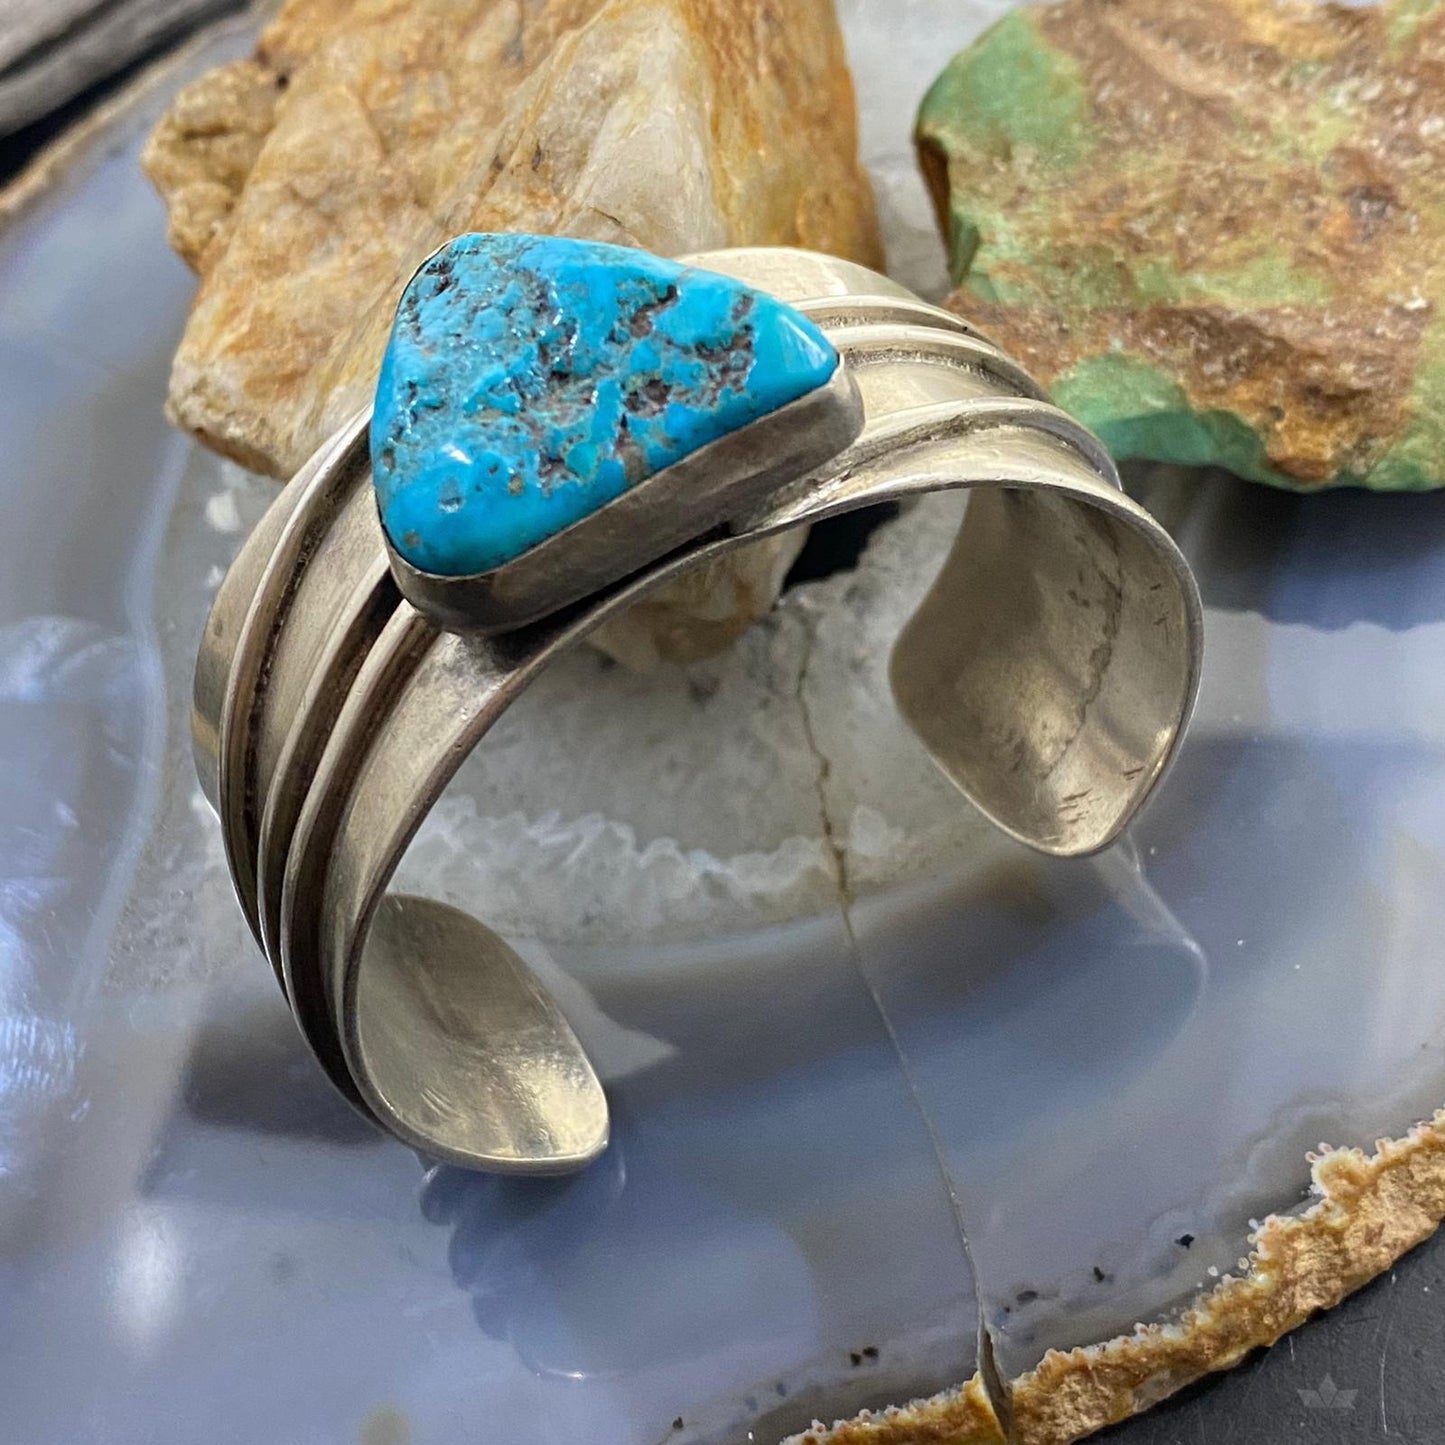 Native American Silver Chunky Turquoise Bracelet For Women